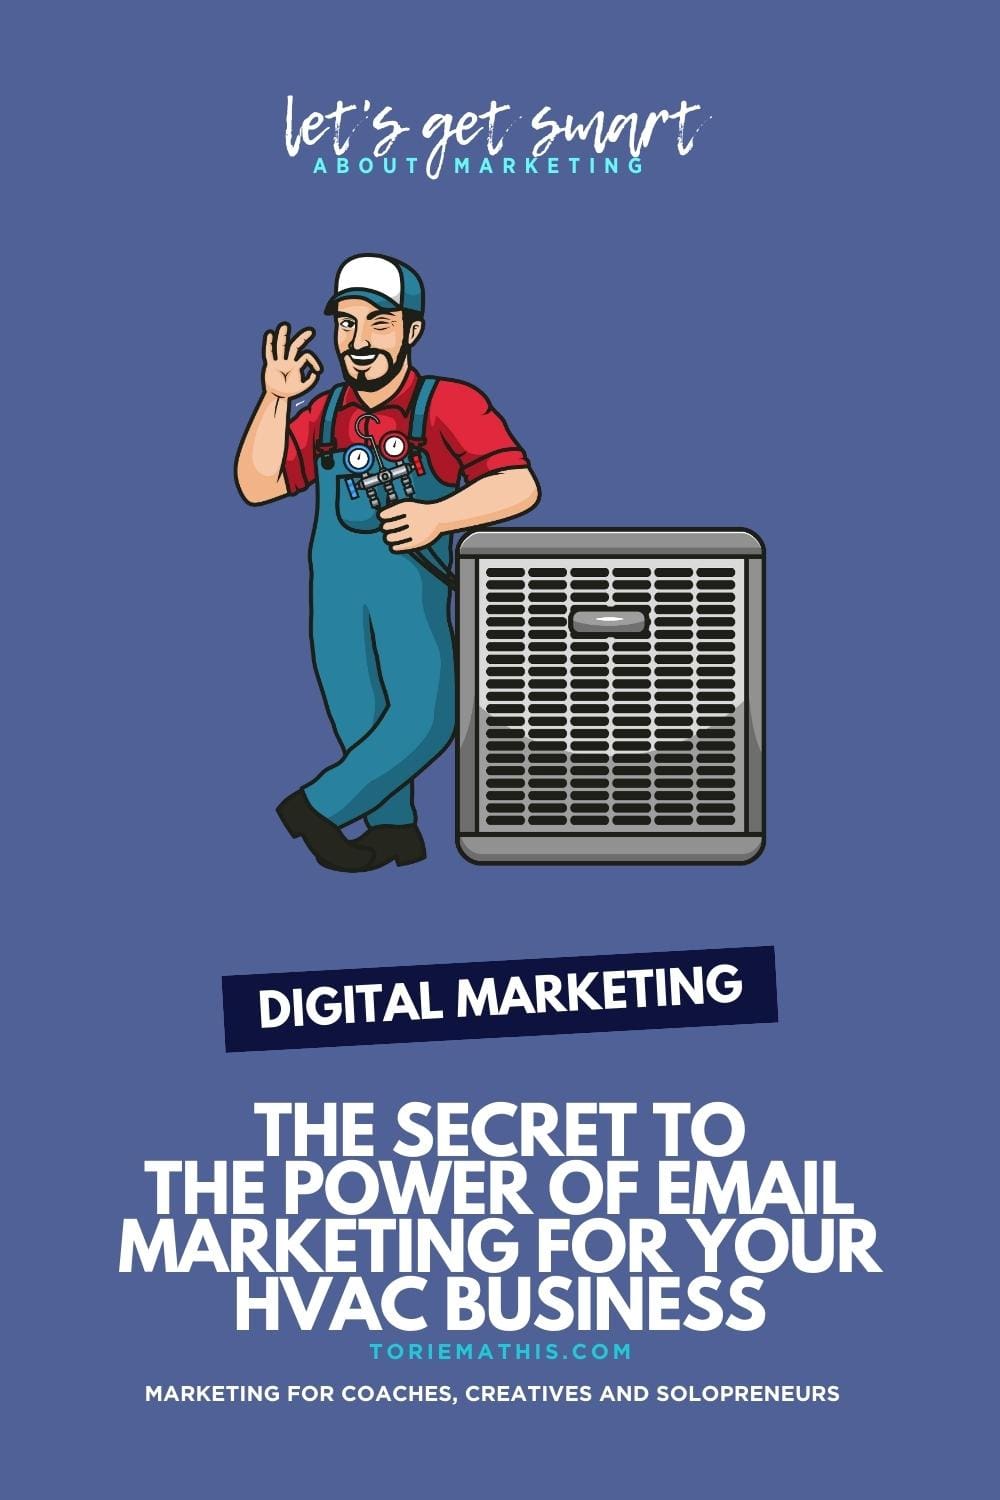 Harnessing The Power Of Email Marketing For Your HVAC Business